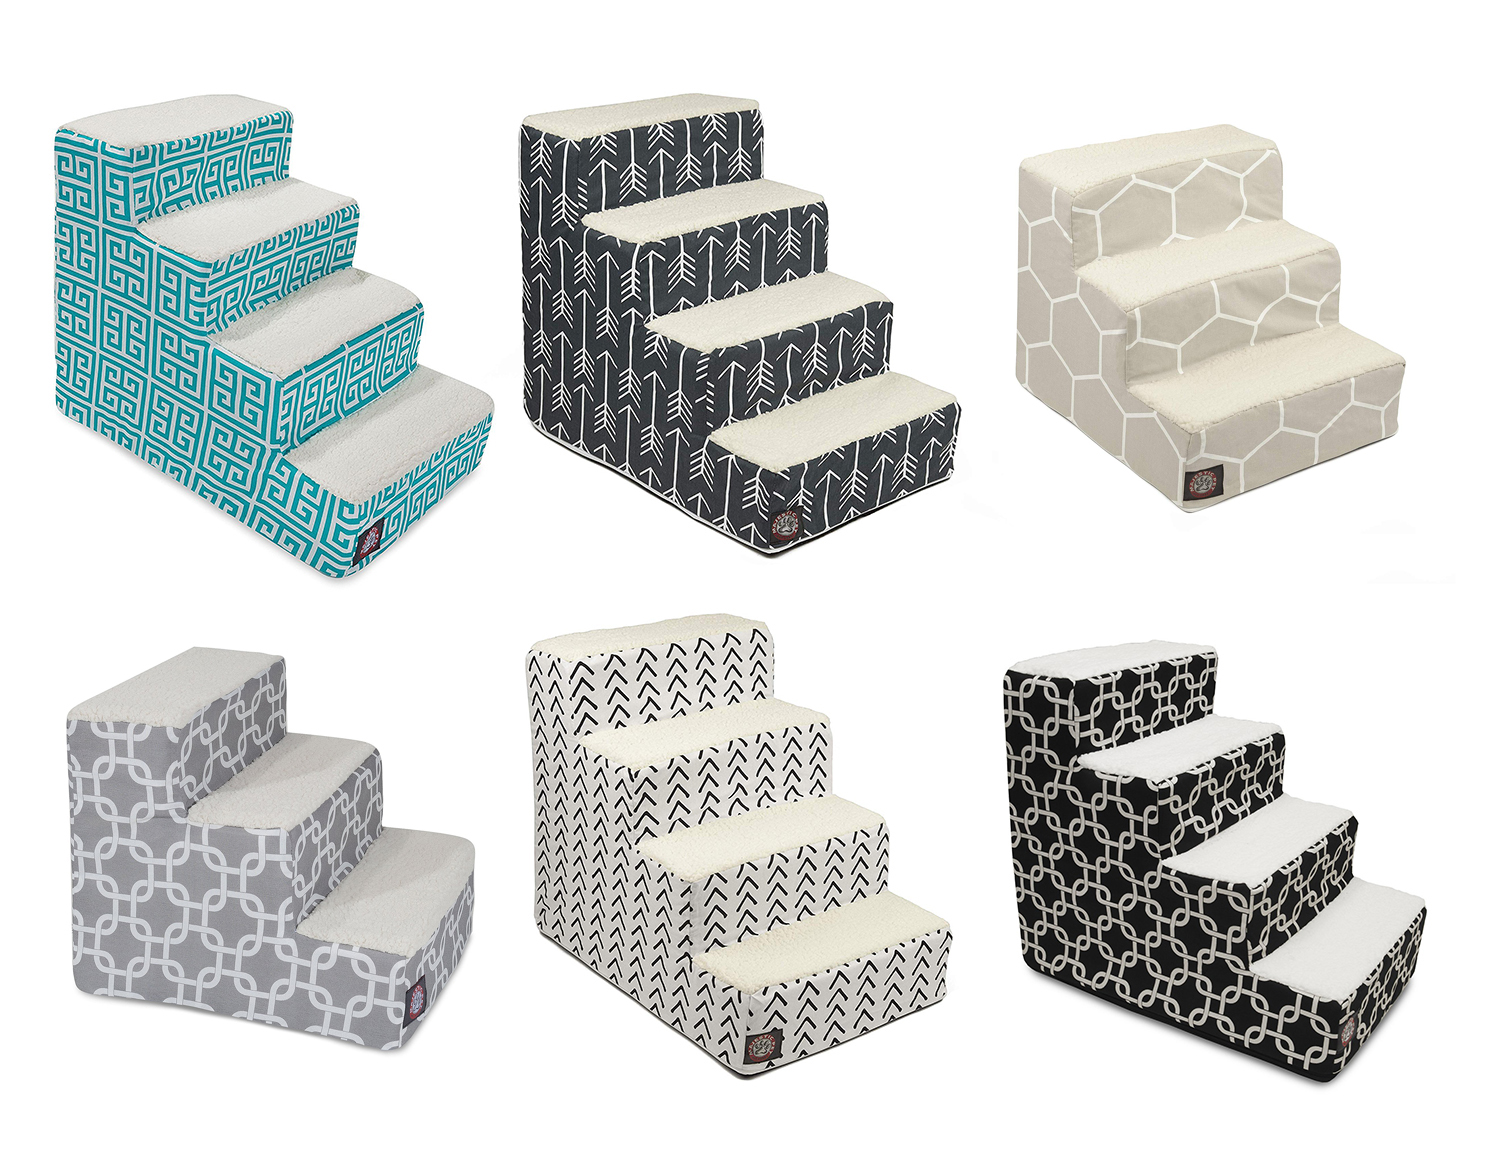 Soft Designer Pet Steps with Colorful Fabrics and Patterns